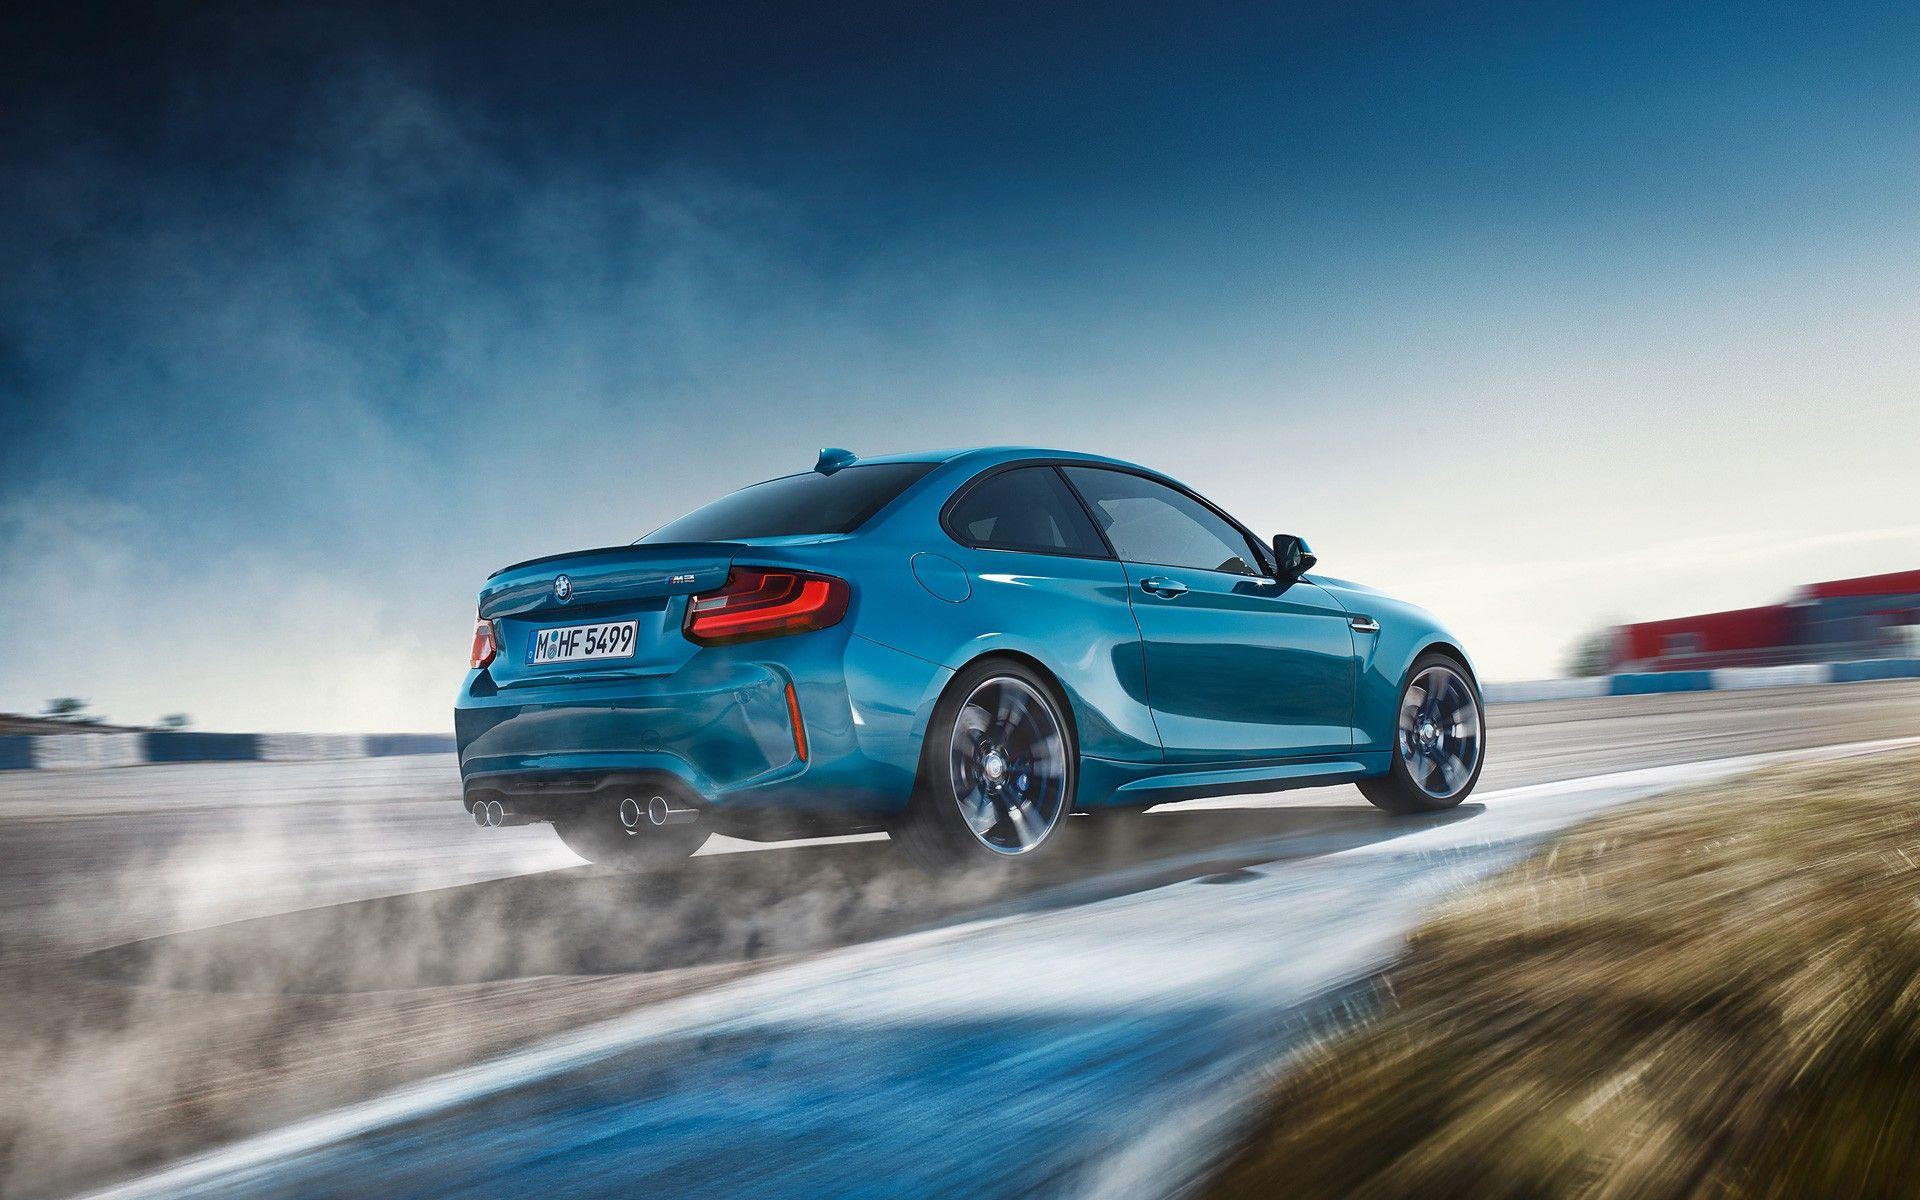 Get Your BMW M2 Wallpaper Fresh Out the Oven